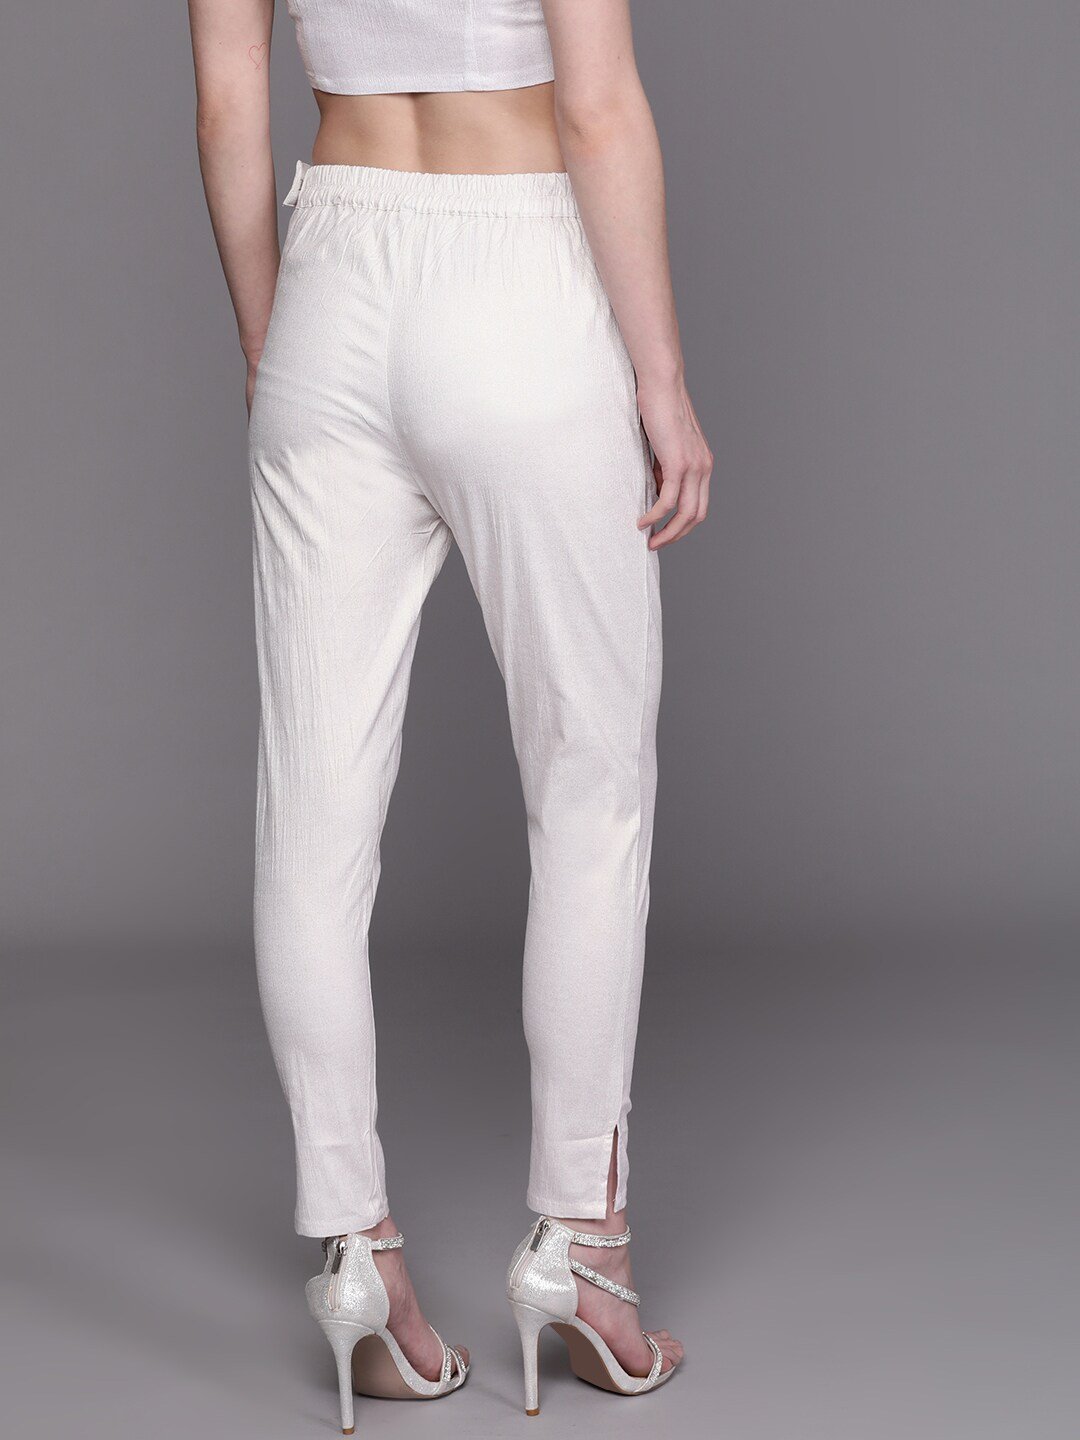 Women's  White Solid Regular Cropped Trousers - AKS